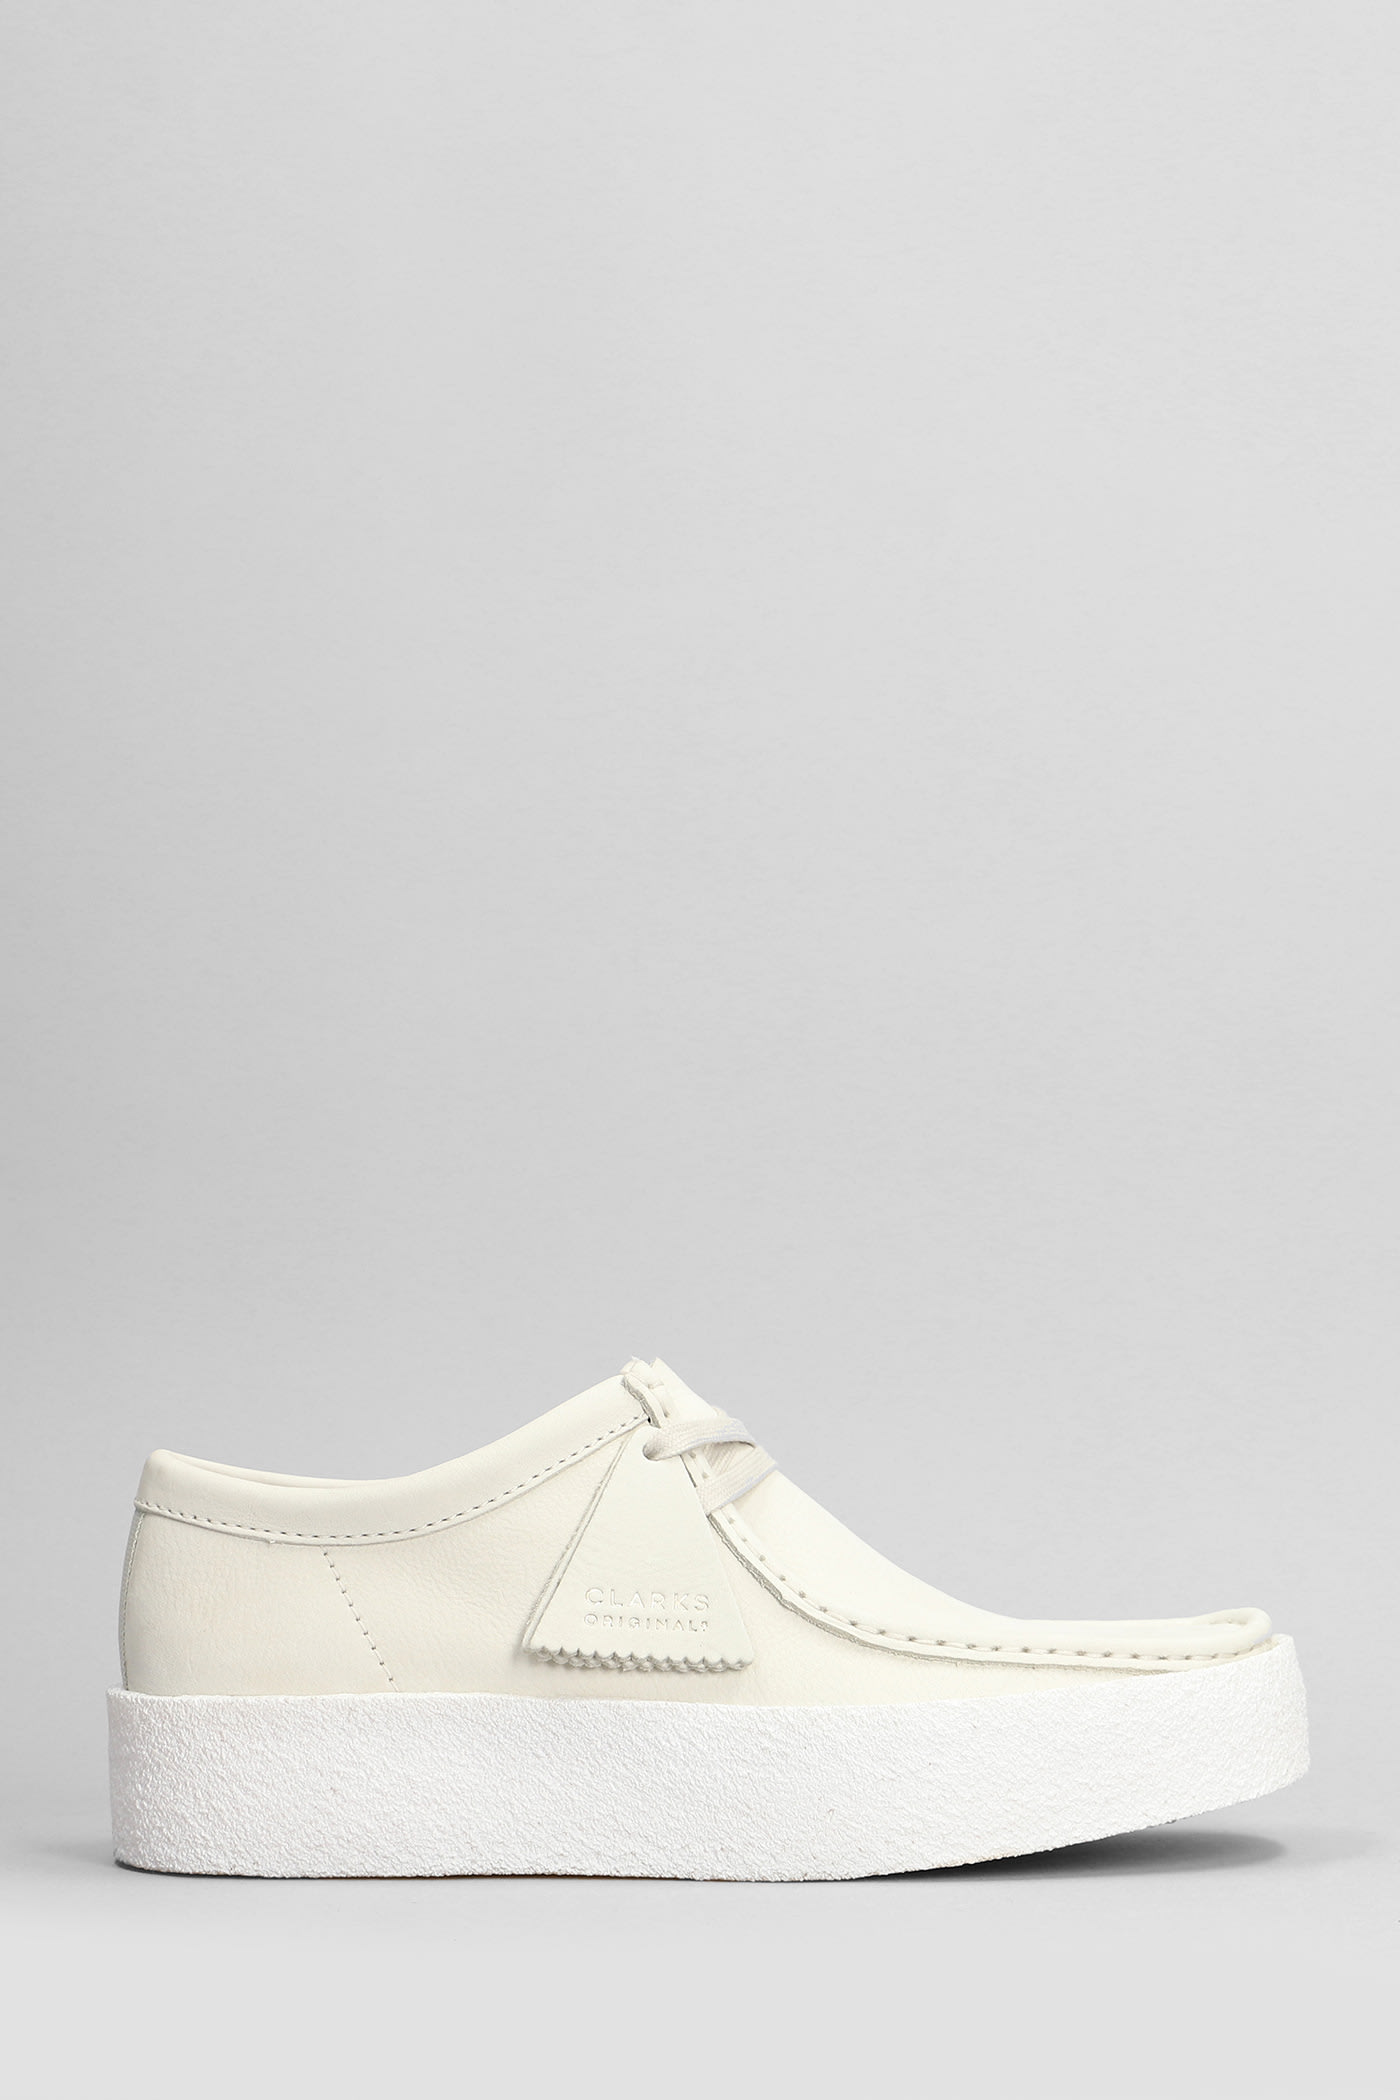 Wallabee Cup Lace Up Shoes In White Nubuck